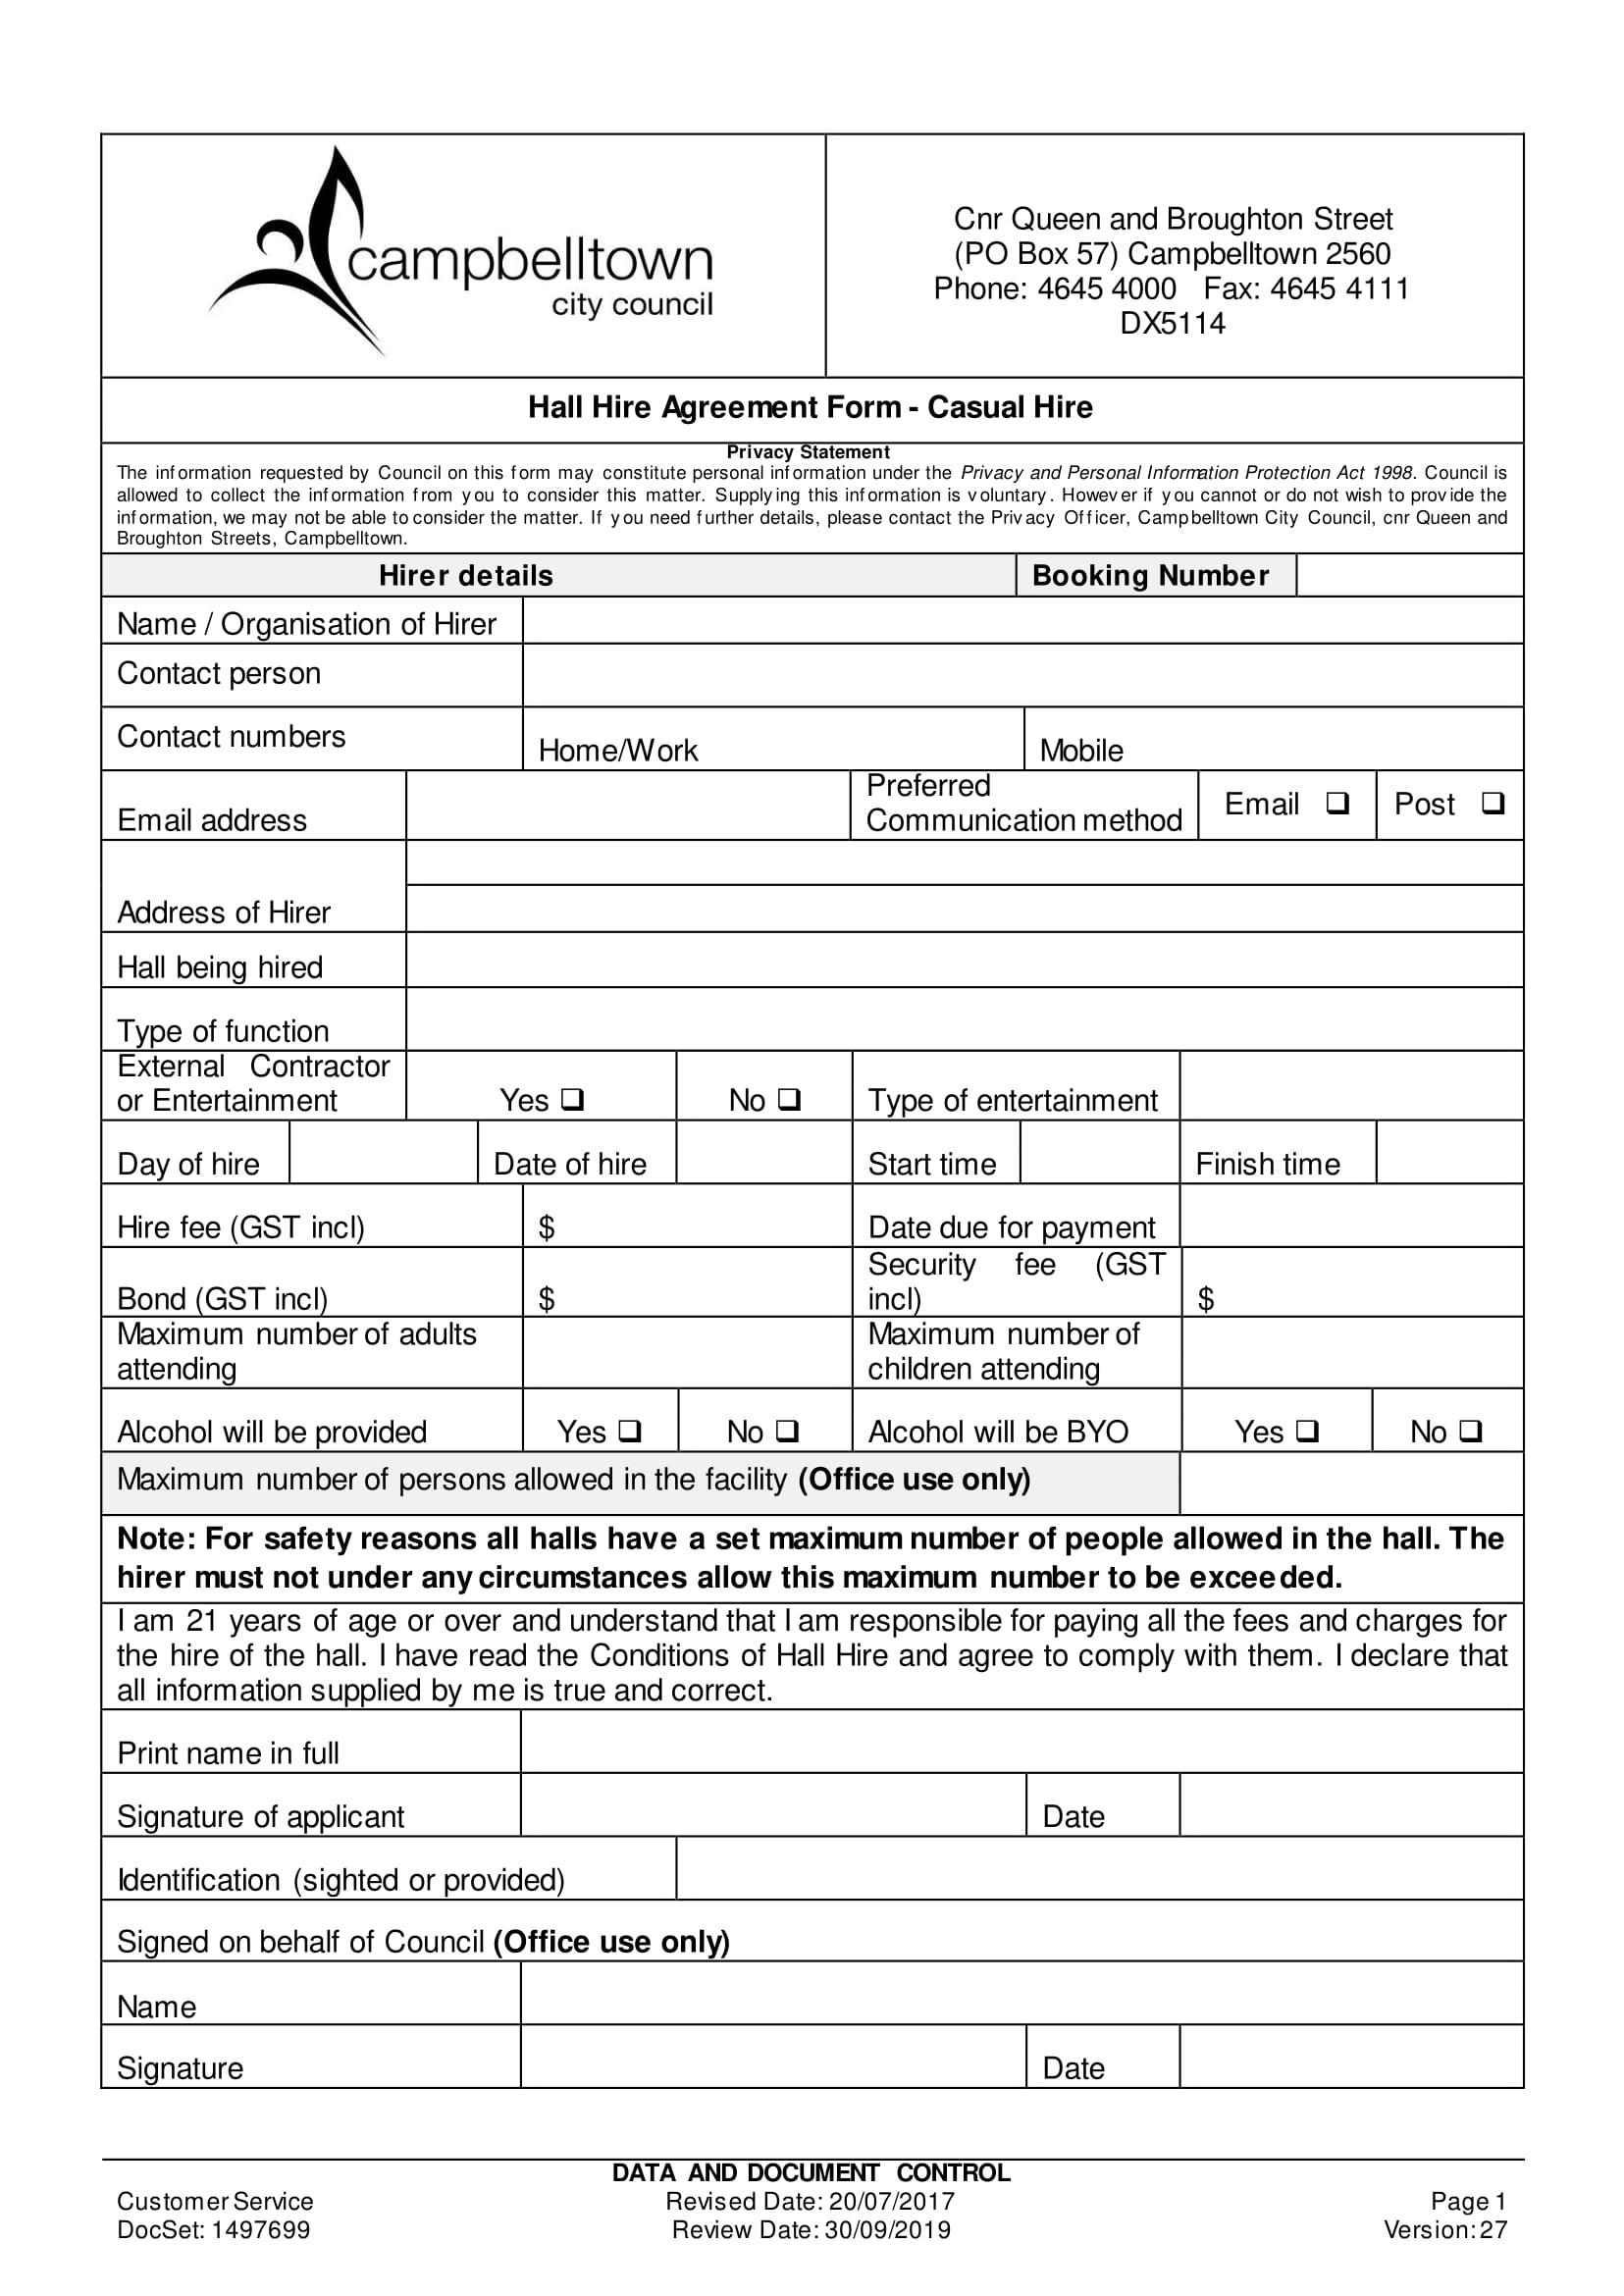 hall hire agreement contract form 1